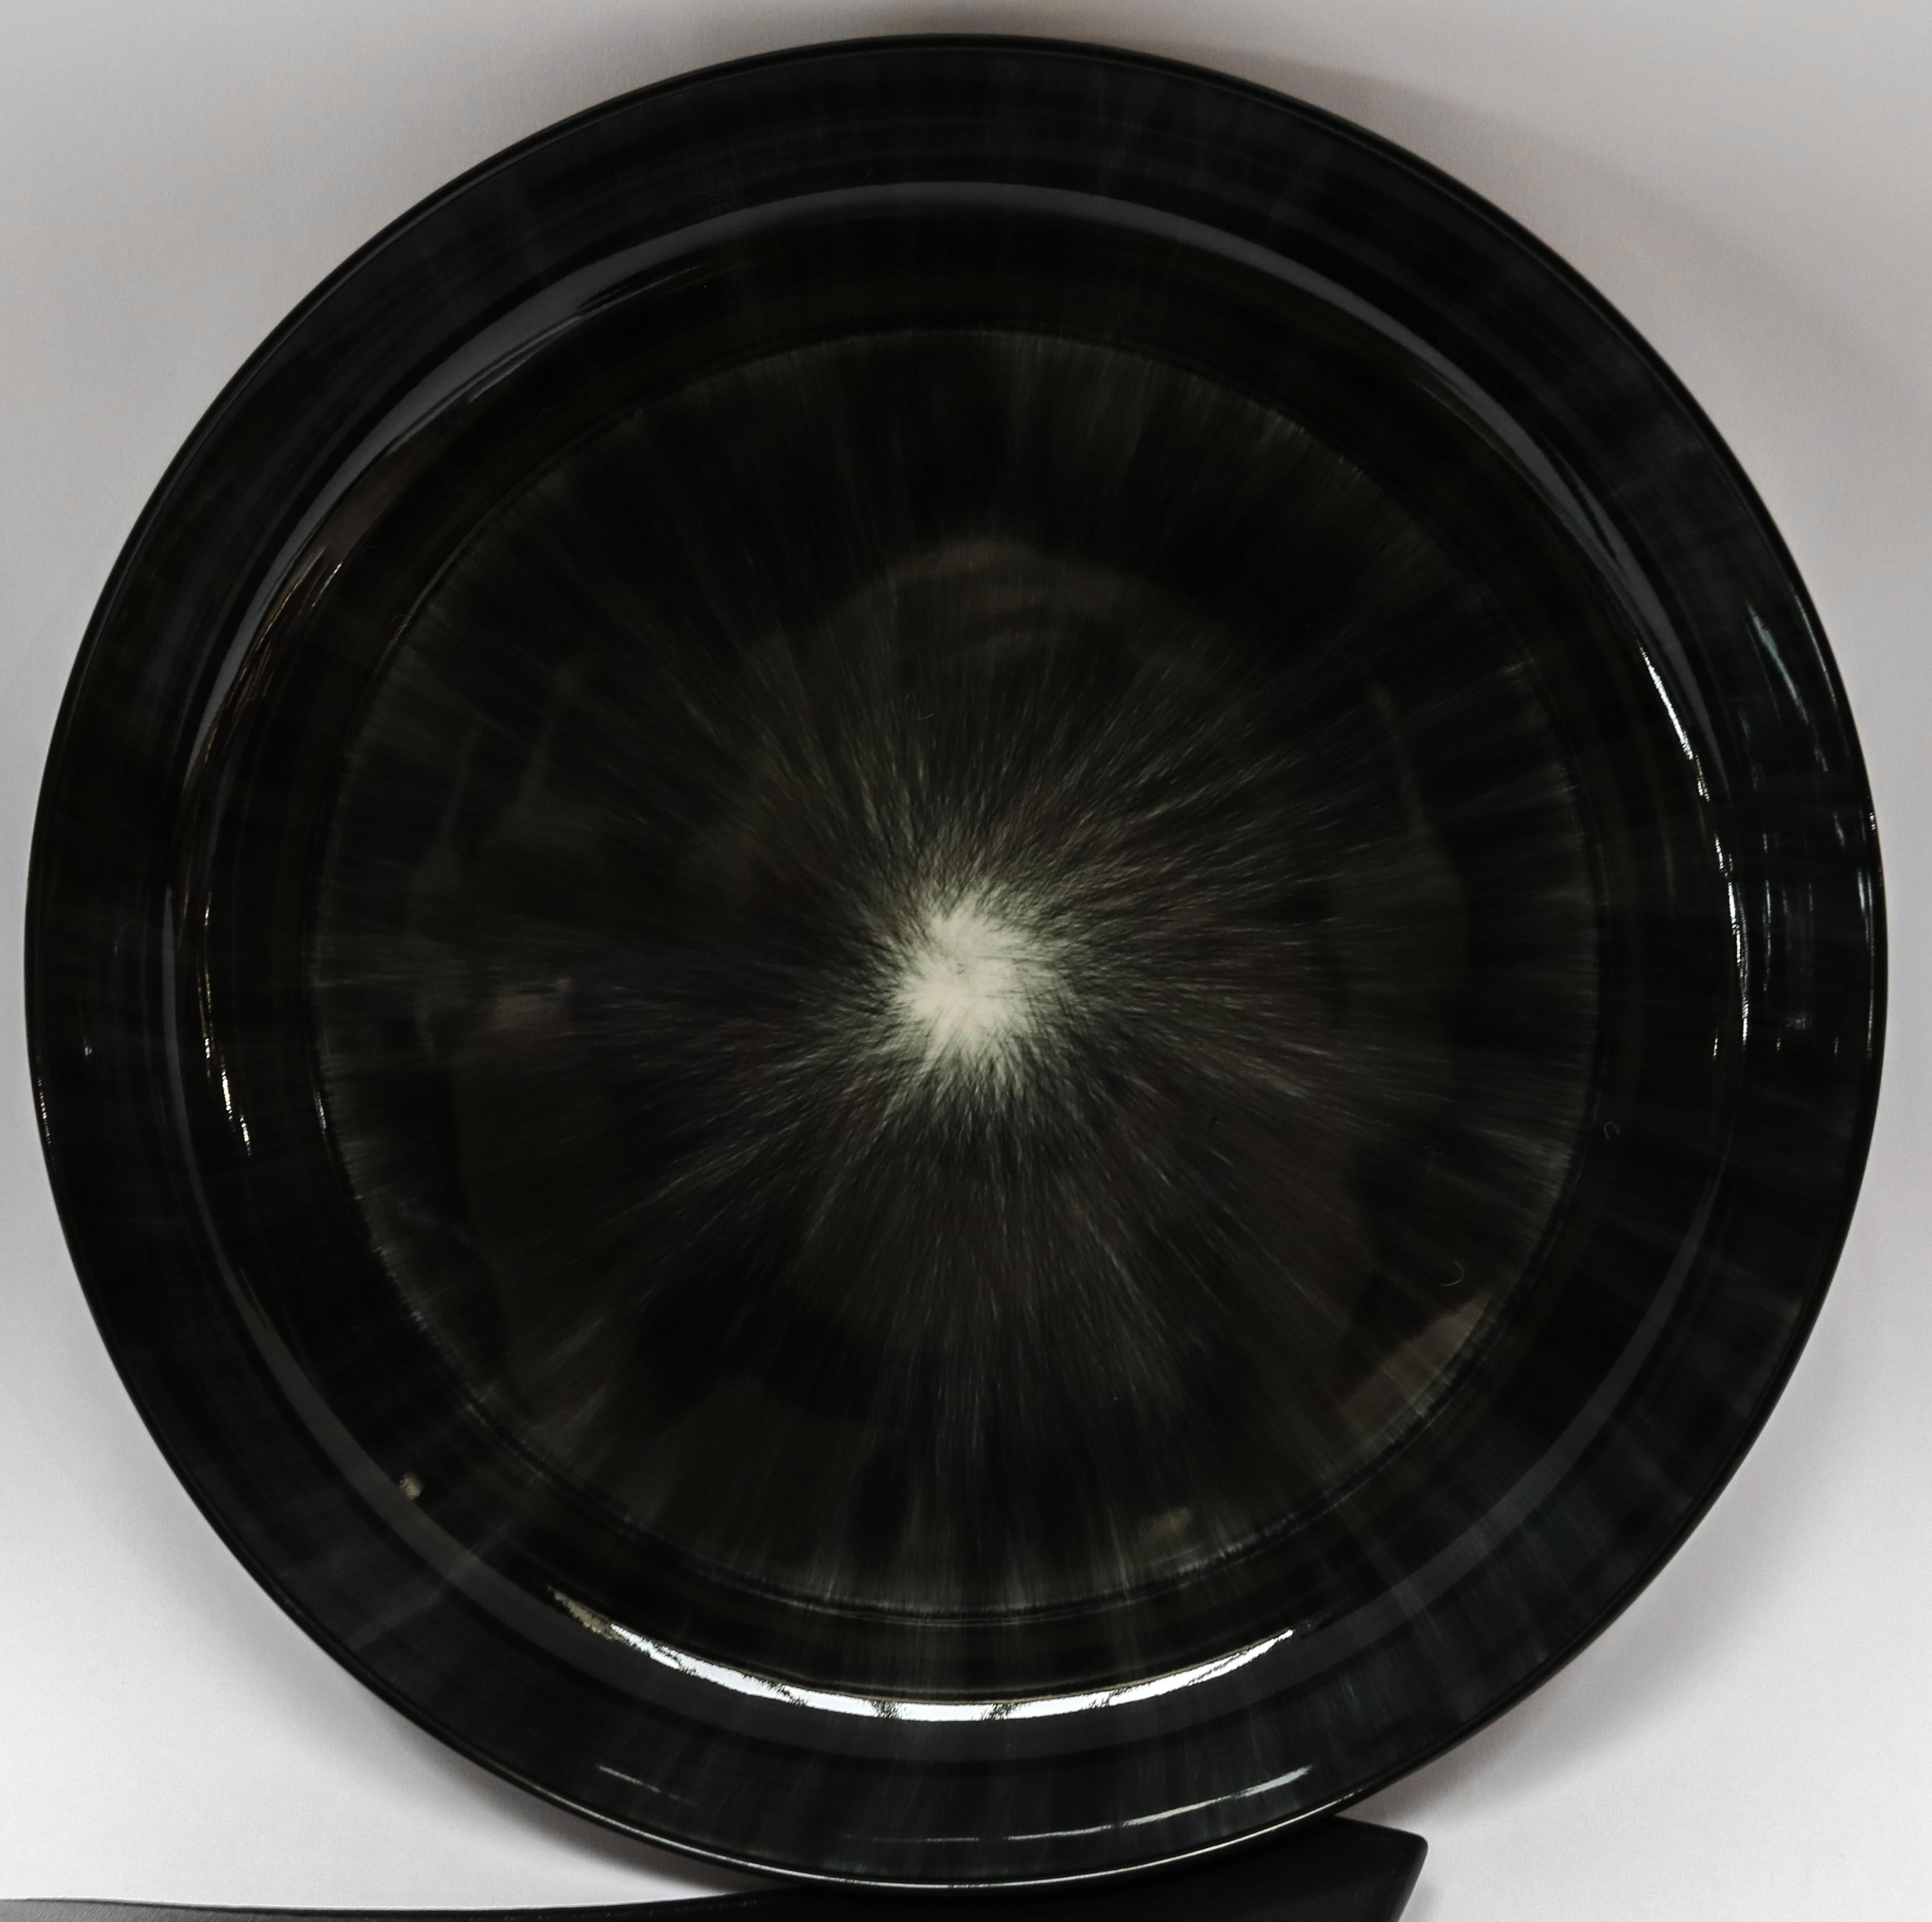 Ann Demeulemeester for Serax Dé x-large high plate / bowl in black / off white. Hand painted with a starburst pattern. Measures: 27 cm diameter x 4.2 cm high. Must be purchased in quantities of two.